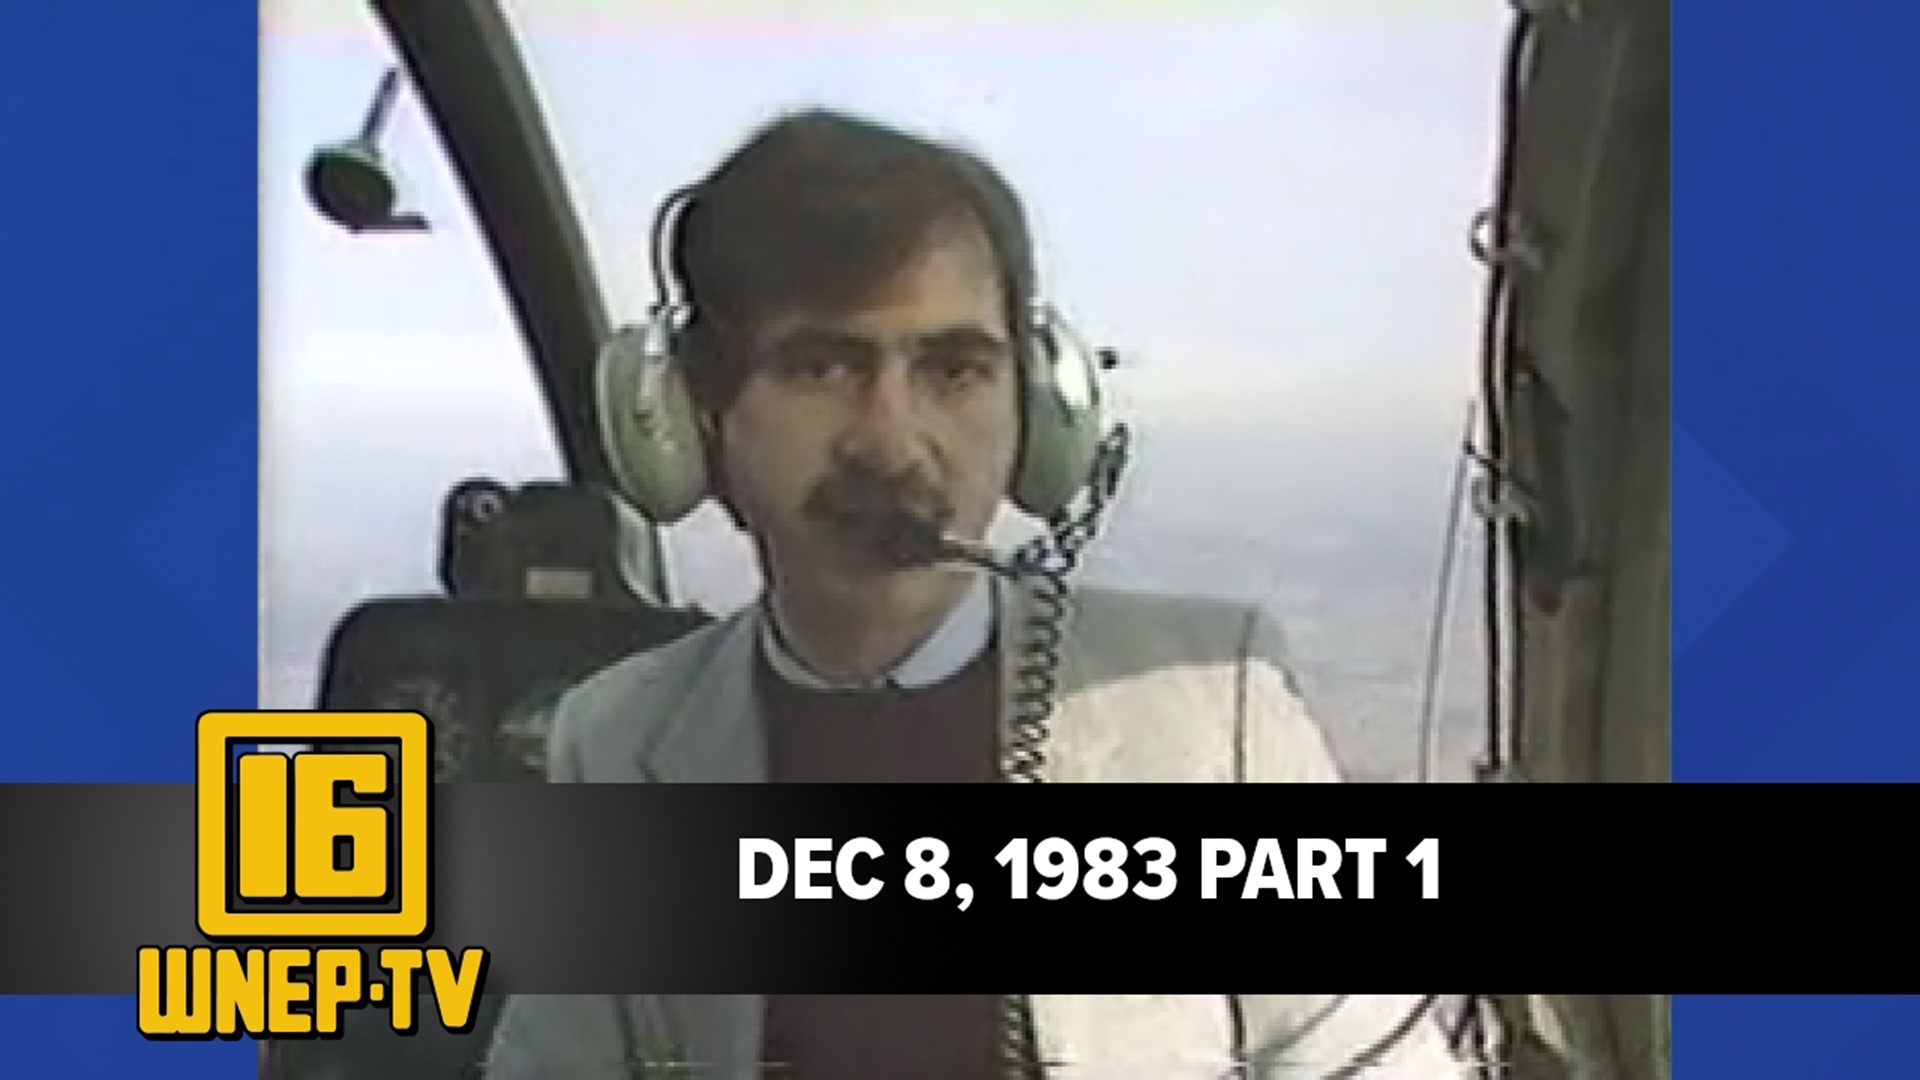 Join Karen Harch and Nolan Johannes for curated stories from December 8, 1983.